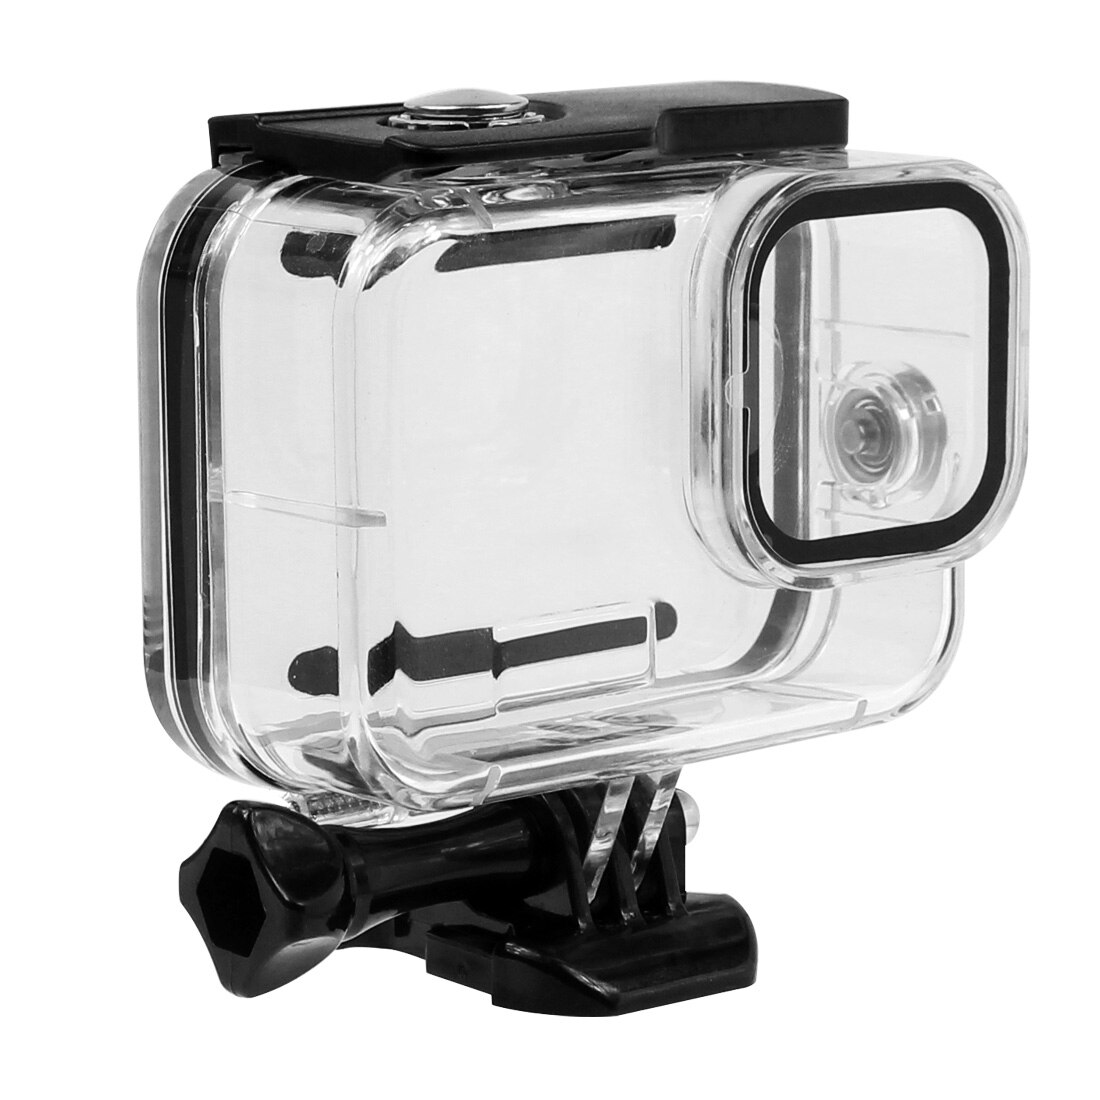 BGNing Plastic Protective Frame Housing Cold Shoe Extension Mount for GoPro Hero 9 Black Camera Waterproof Underwater Case for Gopro9